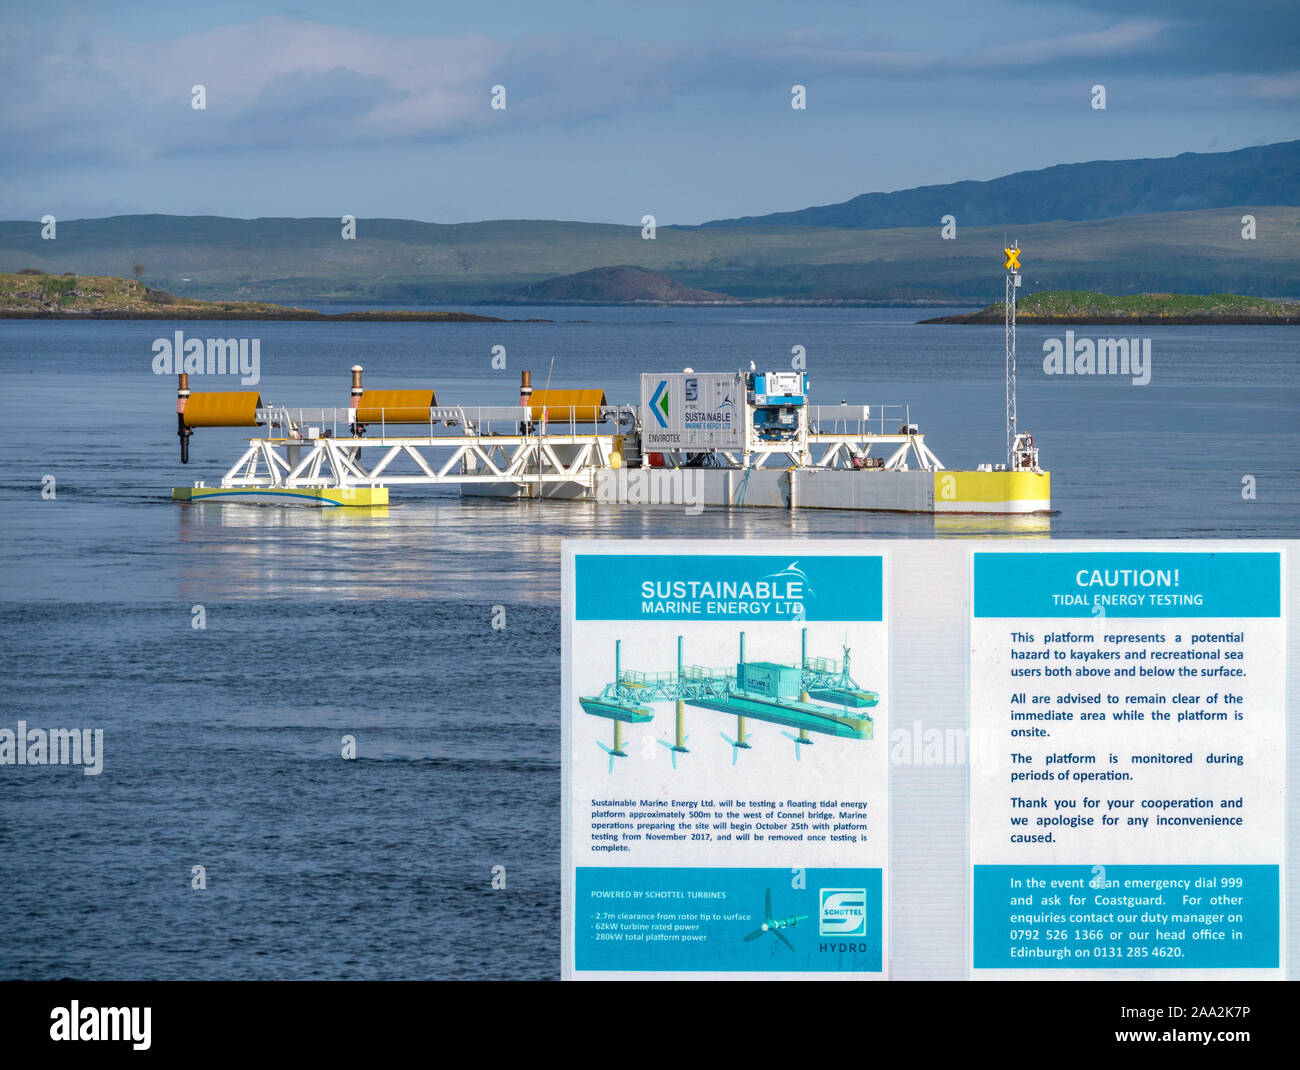 Underwater turbine electricity generation test platform owned by Sustainable Marine Energy Ltd in Loch Etive, Connel, Oban, Scotland, UK Stock Photo